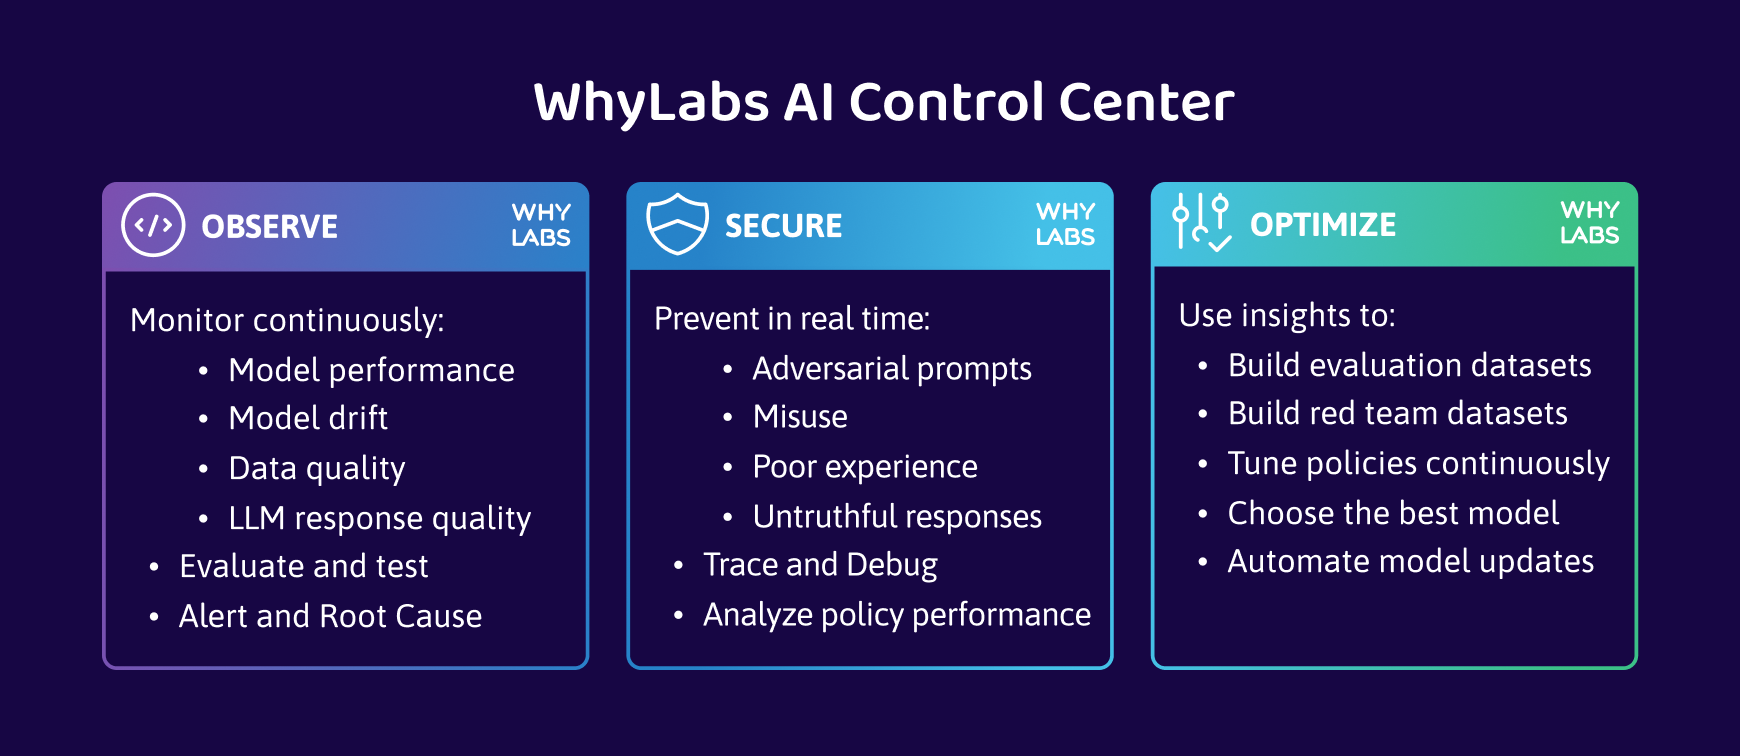 AI Observability is Dead, Long Live AI Observability! Introducing WhyLabs AI Control Center for Generative and Predictive AI